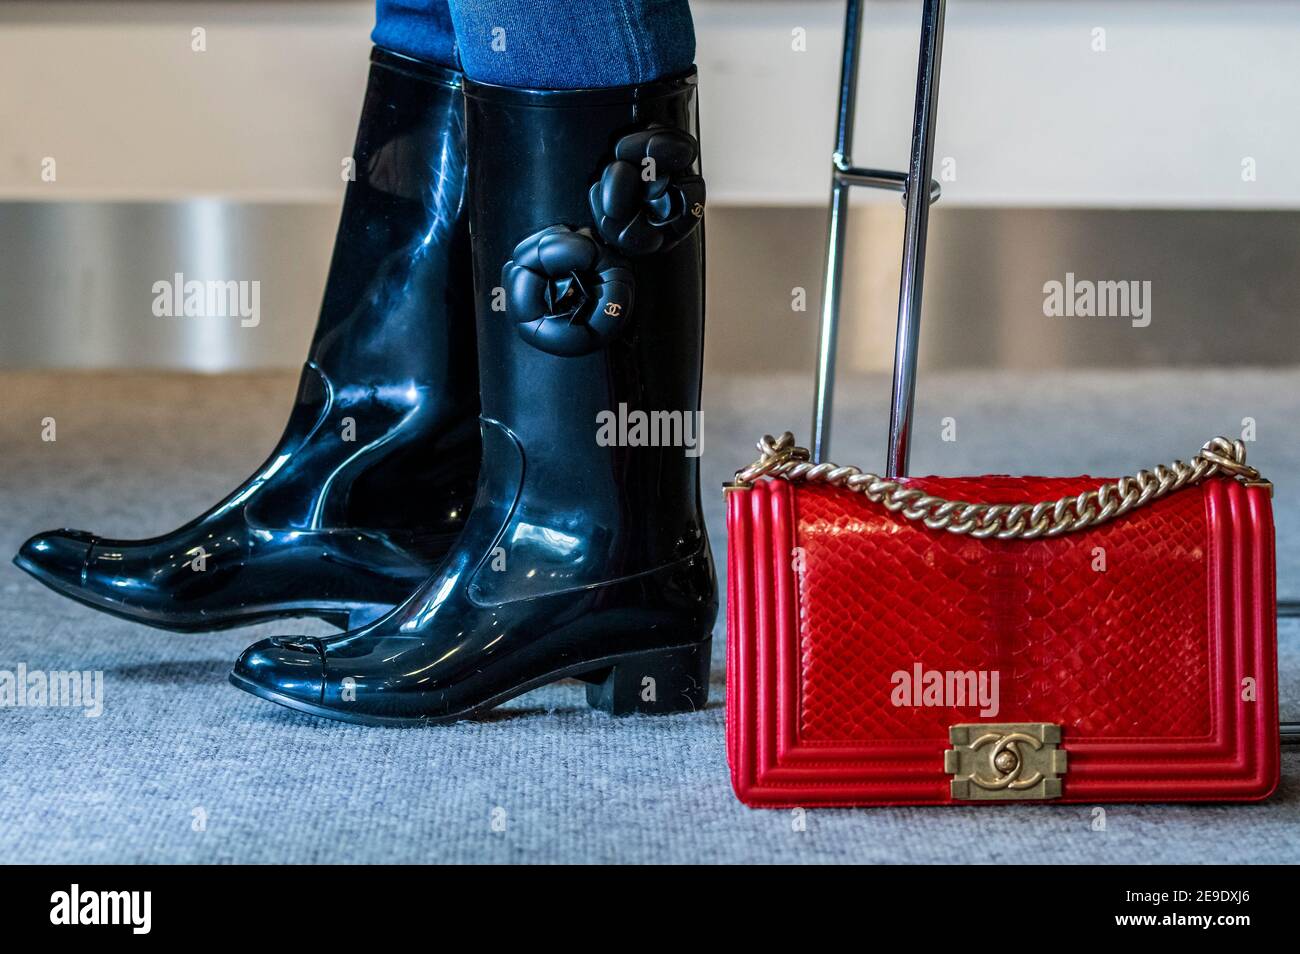 London, UK. 4th Feb, 2021. Designer Wellington Boots by Chanel with  Camellia design (part of a set of 2 pairs) est £200-300 with a Red Python  Medium Boy Bag, Chanel, c. 2014,